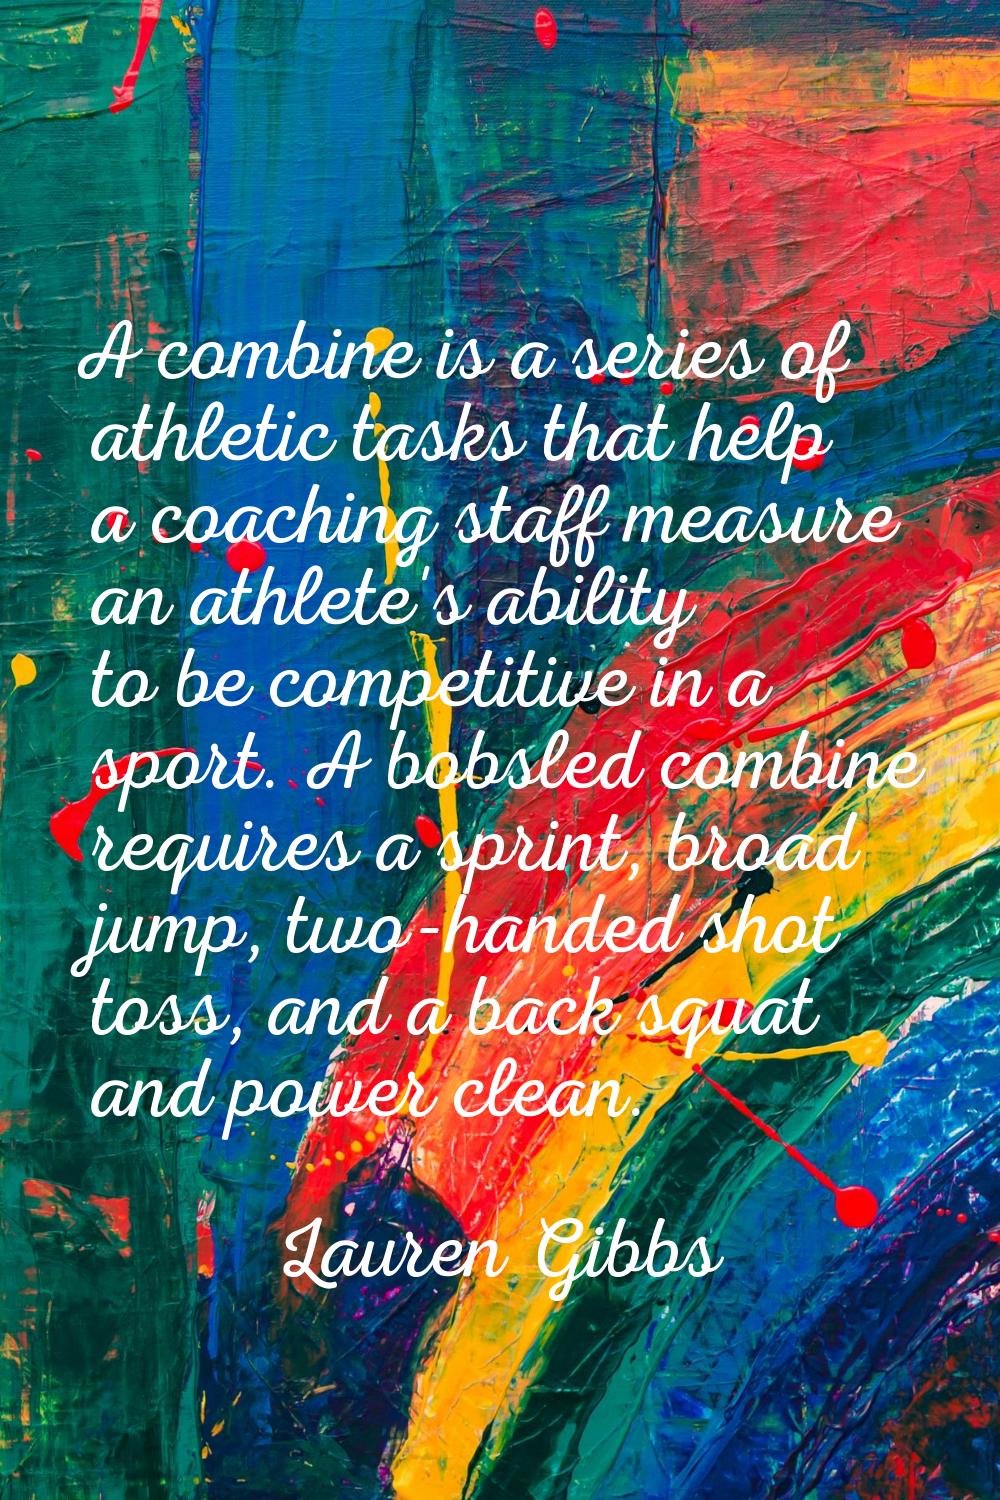 A combine is a series of athletic tasks that help a coaching staff measure an athlete's ability to 